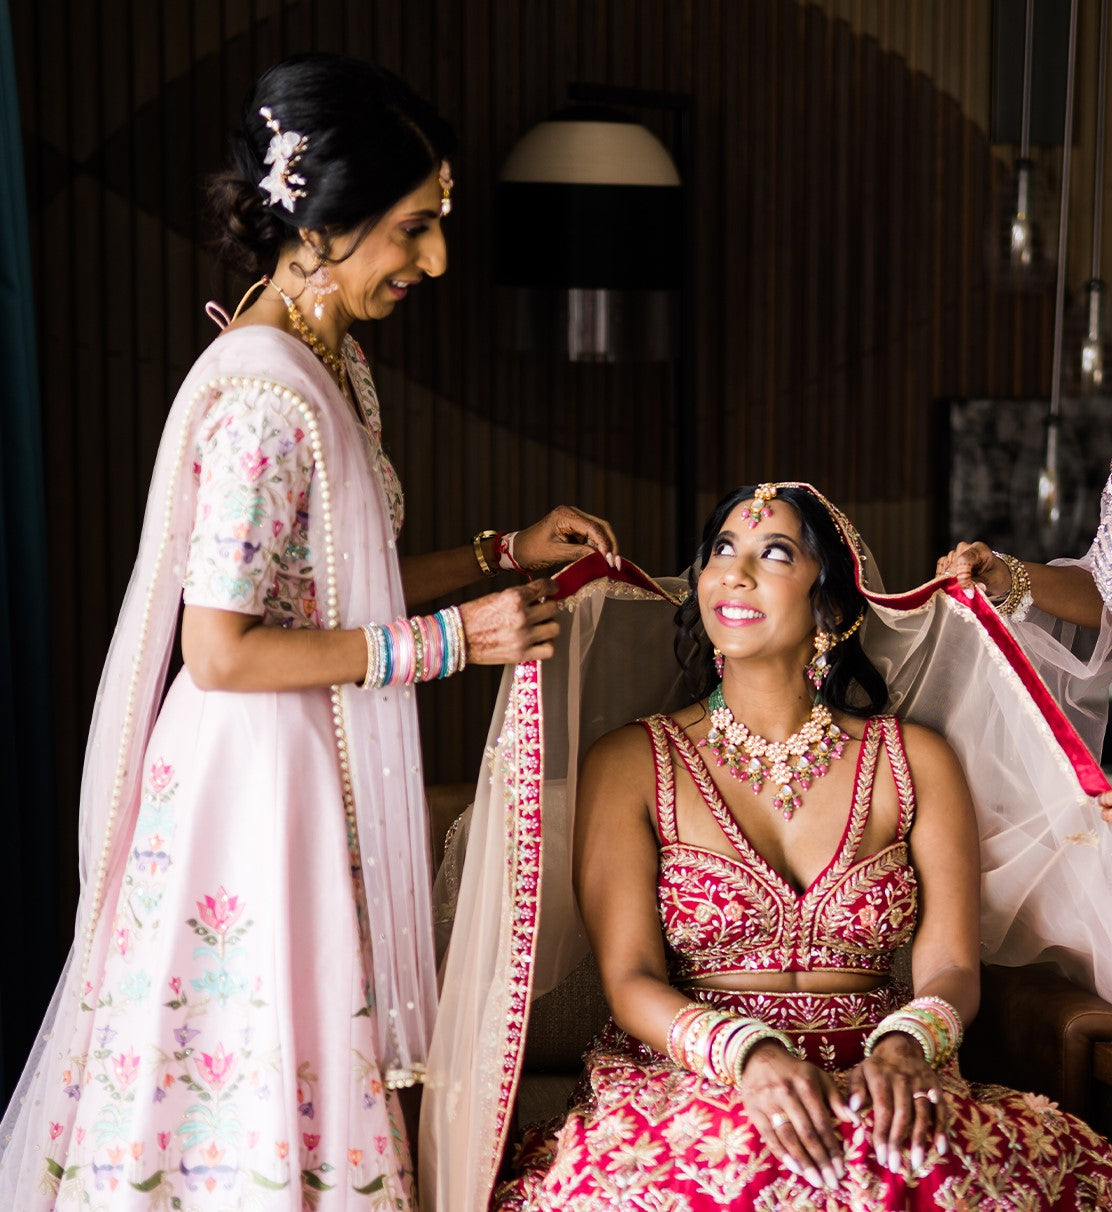 Bridal style guide: 5 expert tips to perfectly style your wedding lehengas